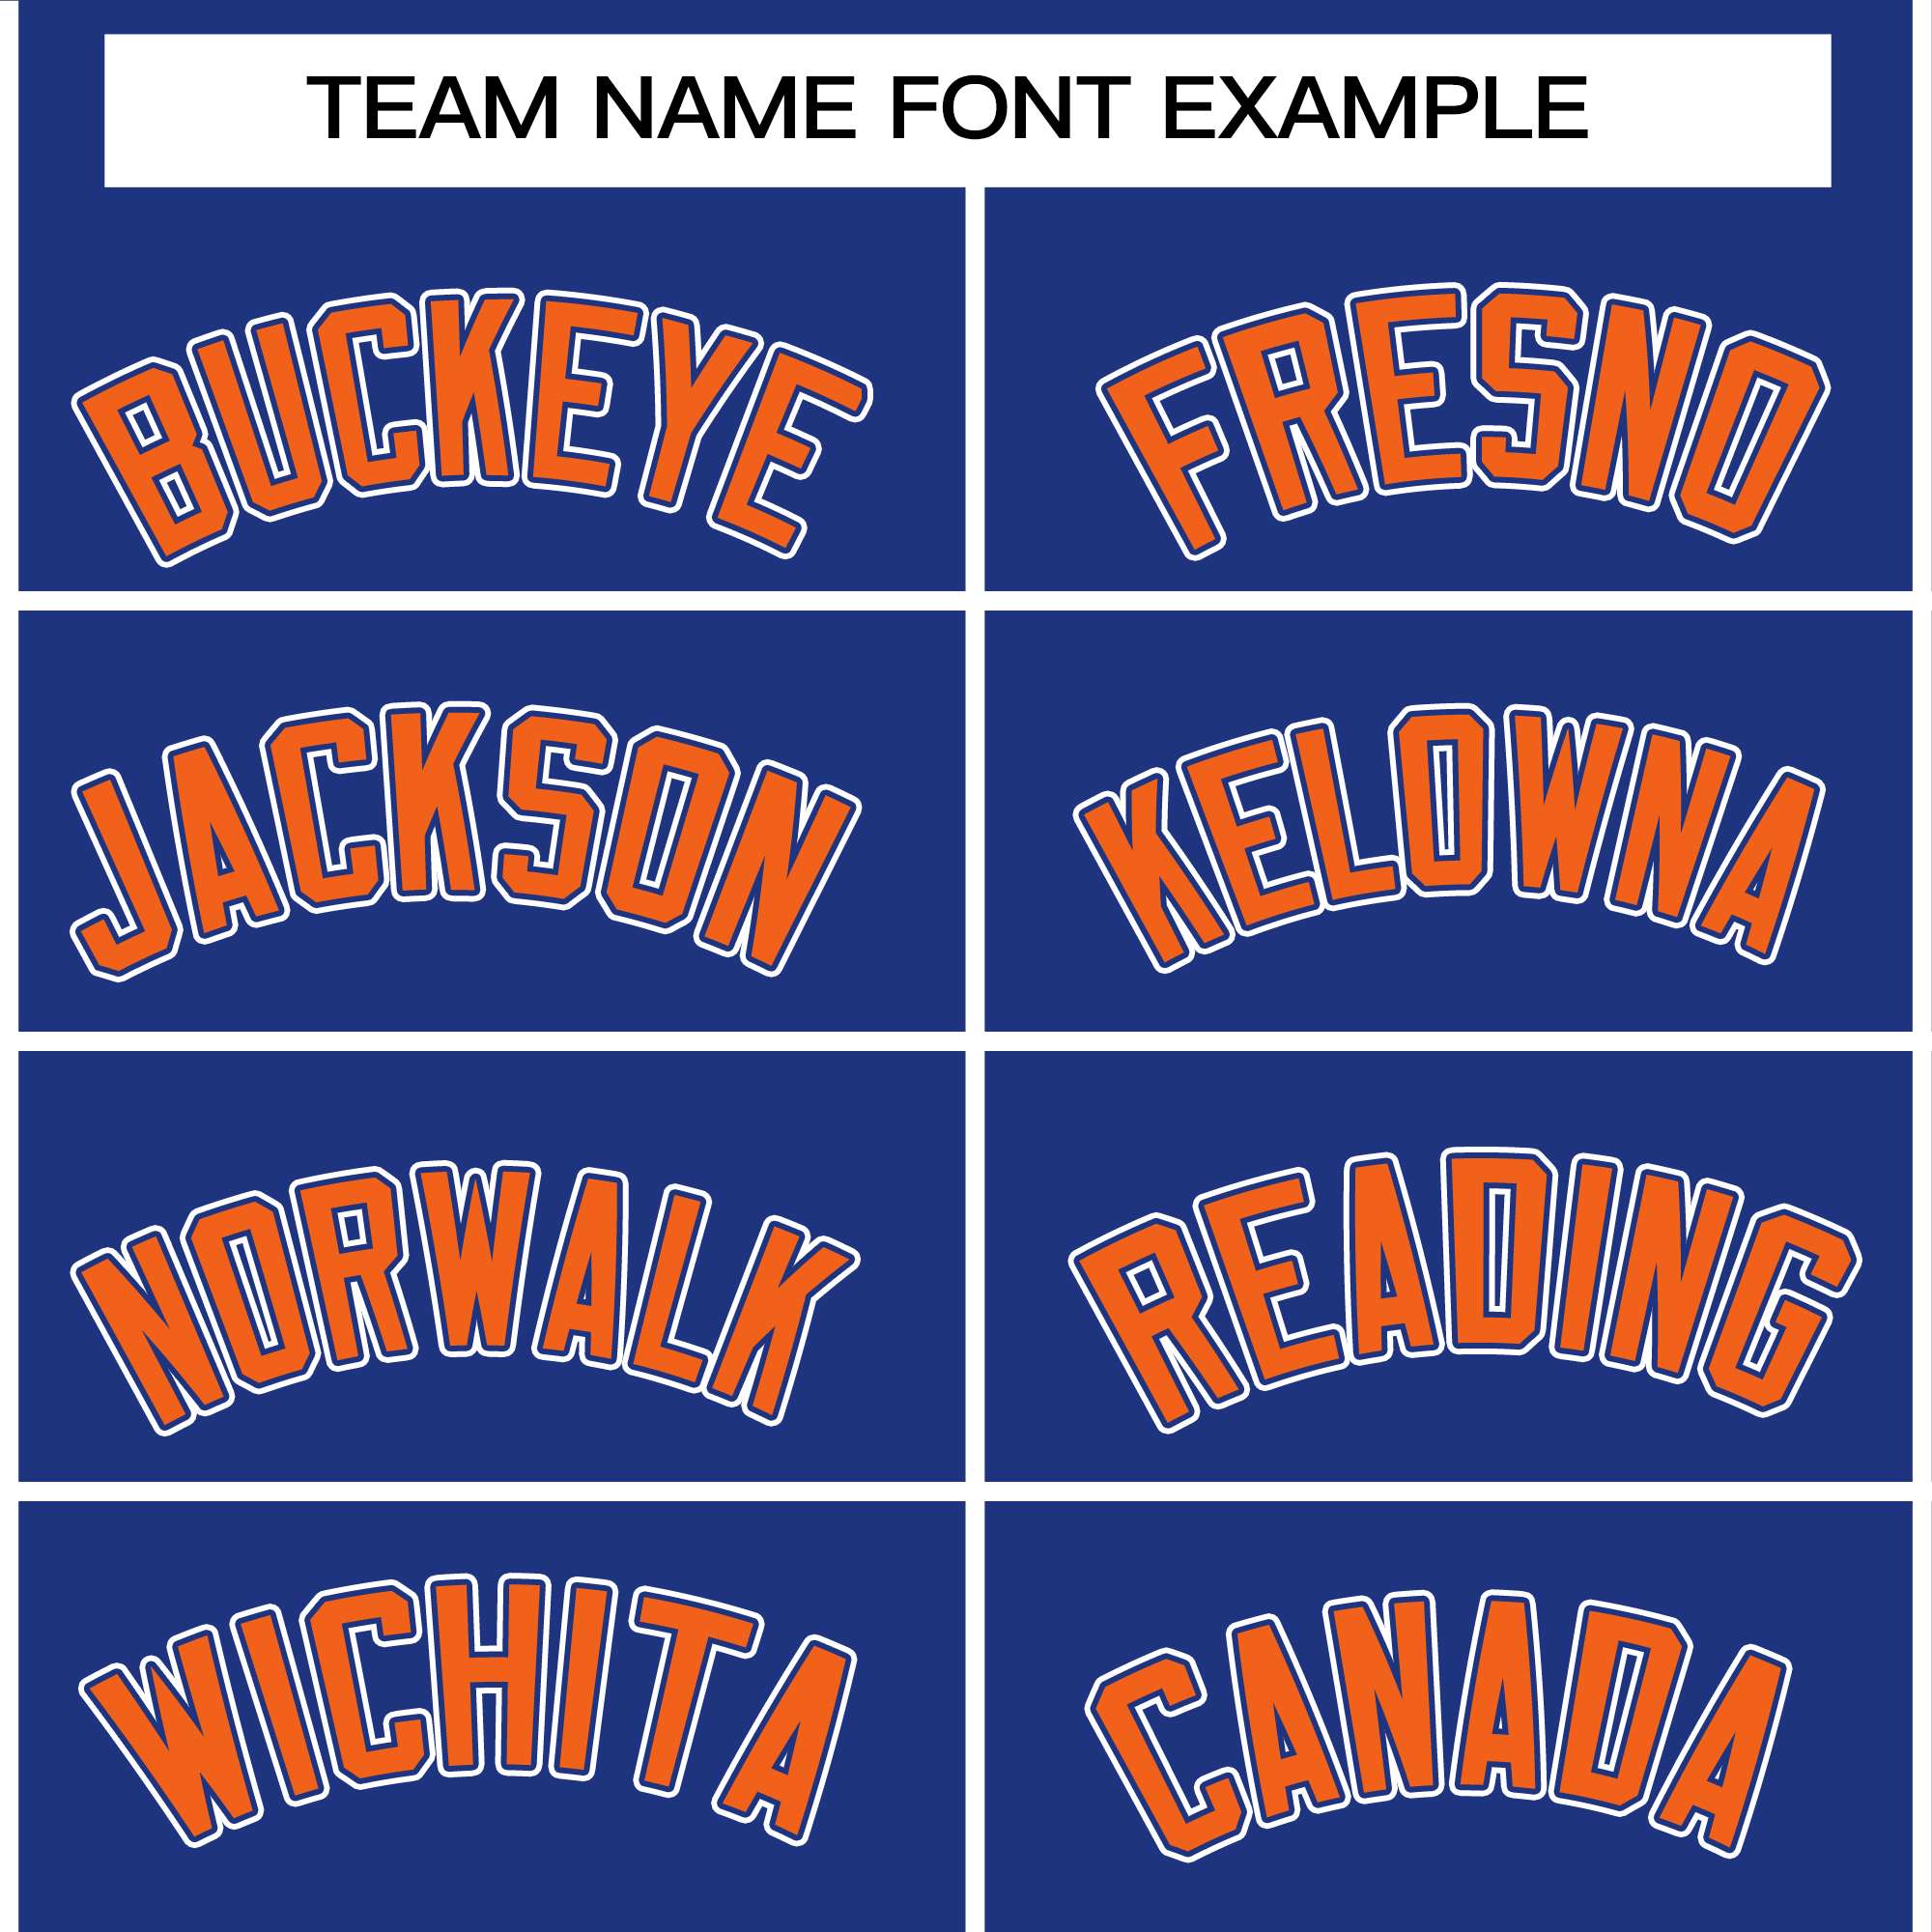 custom stitched pullover hoodies team name font example